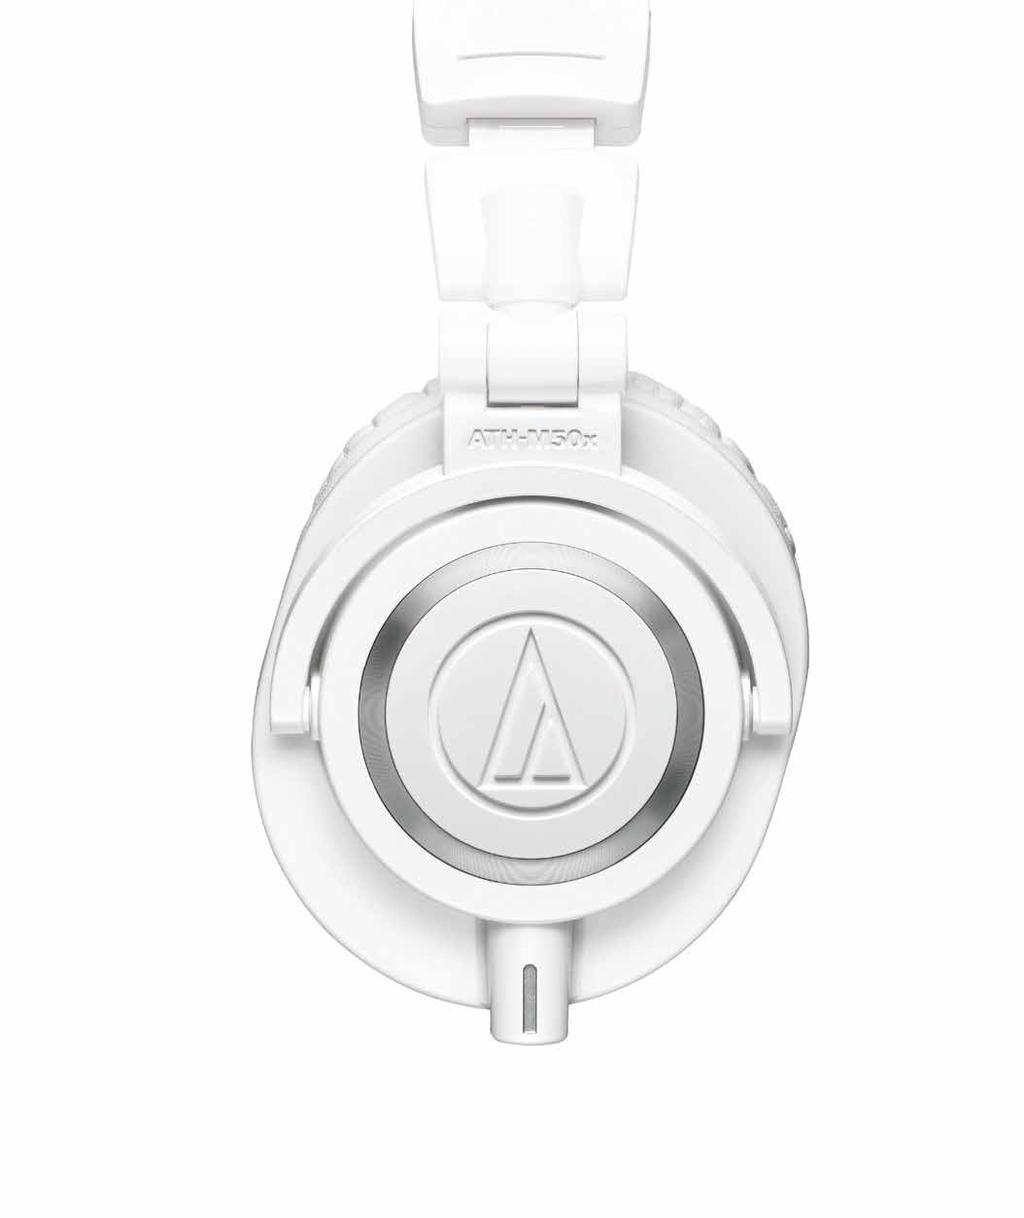 The M50x also includes robust construction, 90 swiveling earcups and three interchangeable cables, providing audio professionals with an